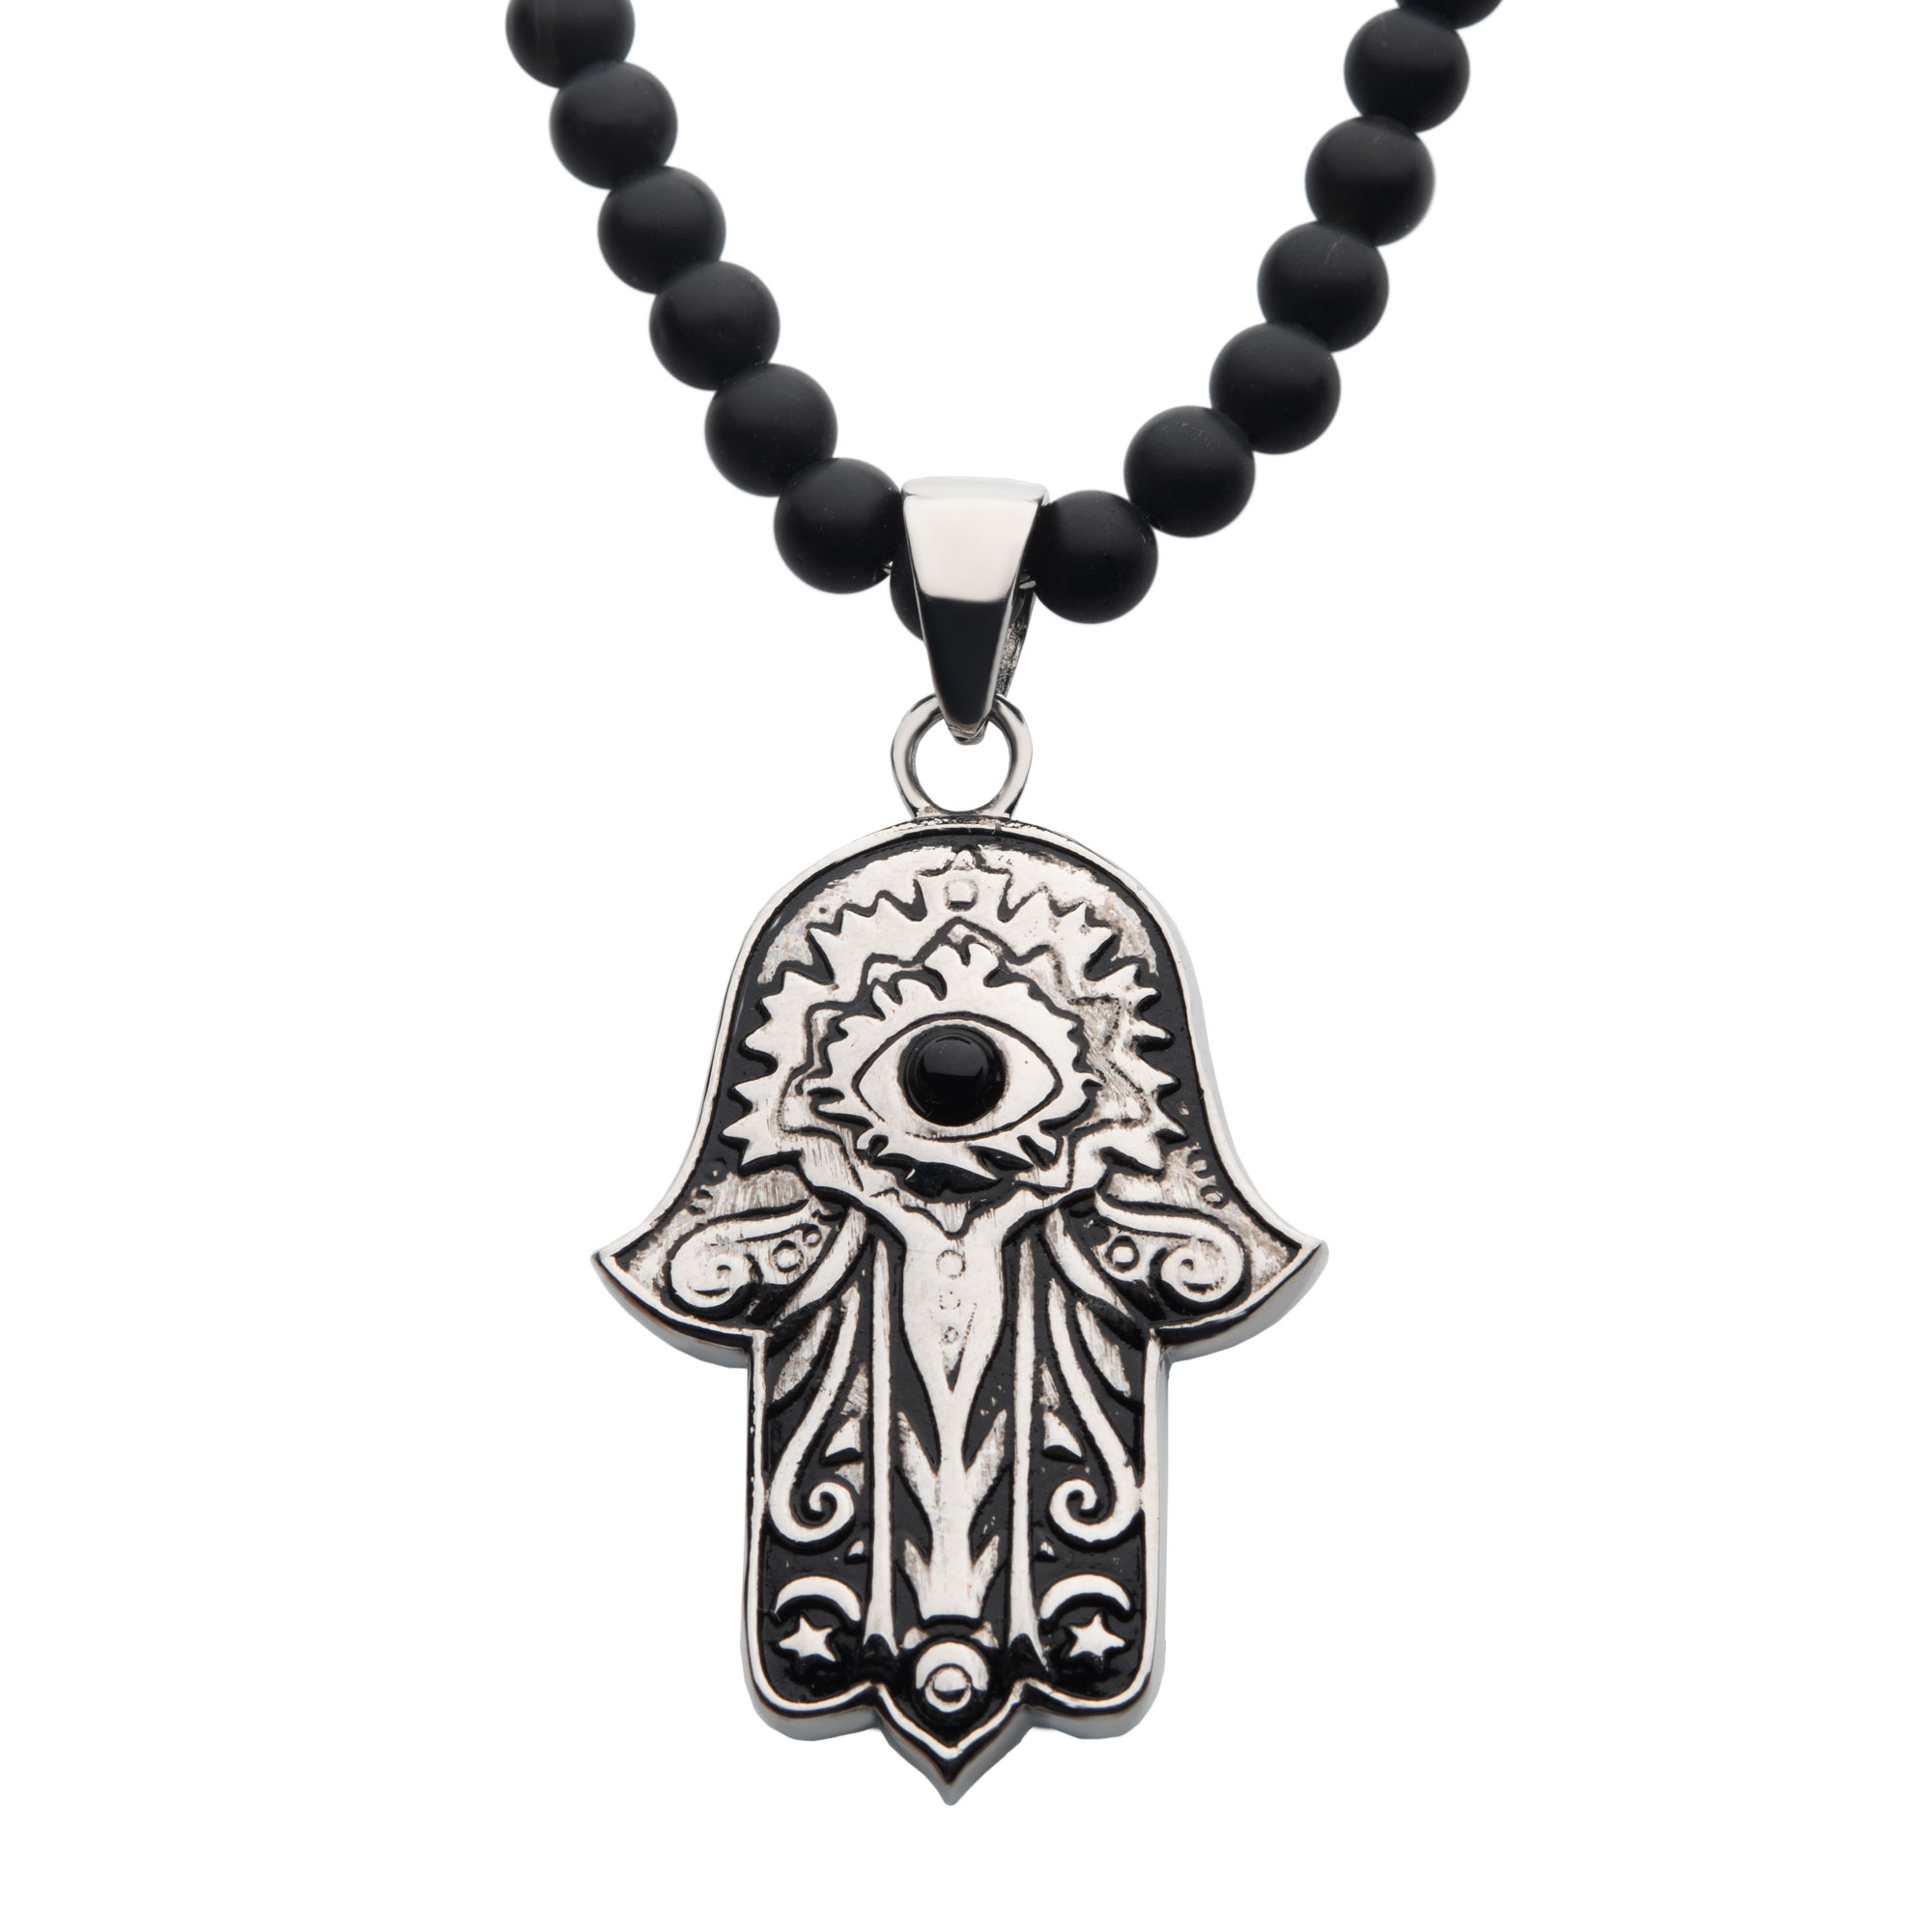 Stainless Steel with Centerpiece Black Agate Stone Hamsa Pendant, with Black Agate Stone Bead Necklace Mitchell's Jewelry Norman, OK